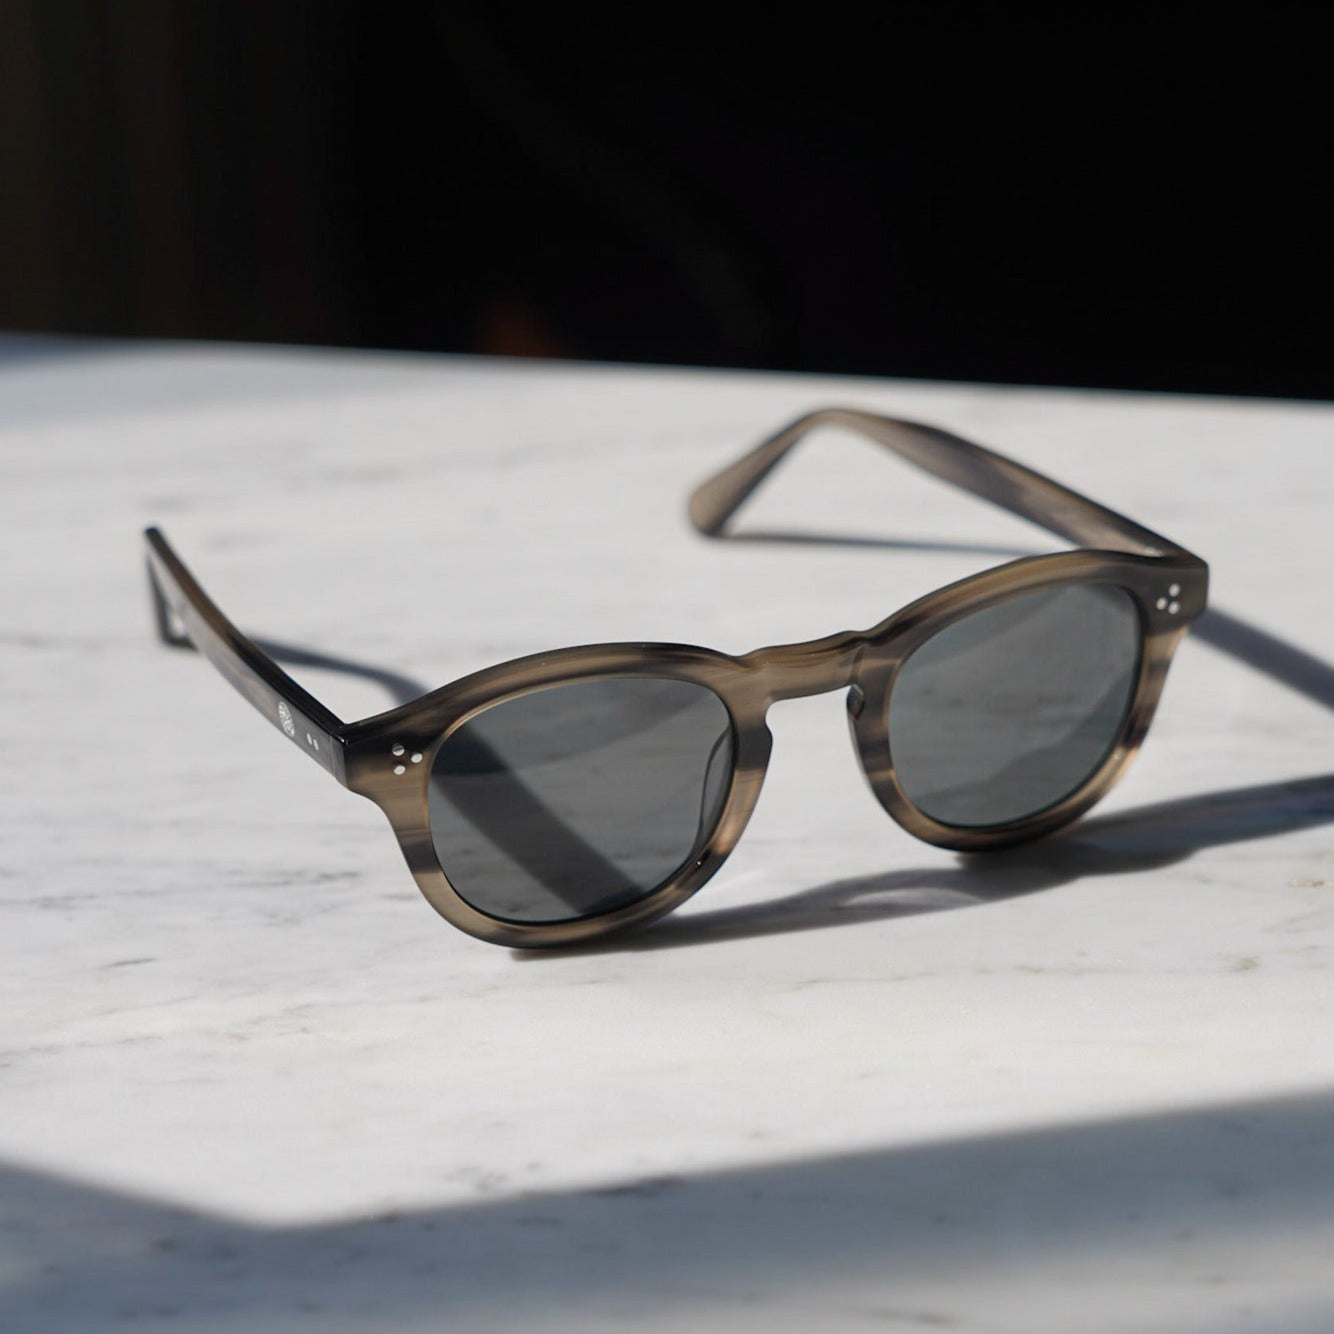 Legacy sunglasses - Mysterious grey